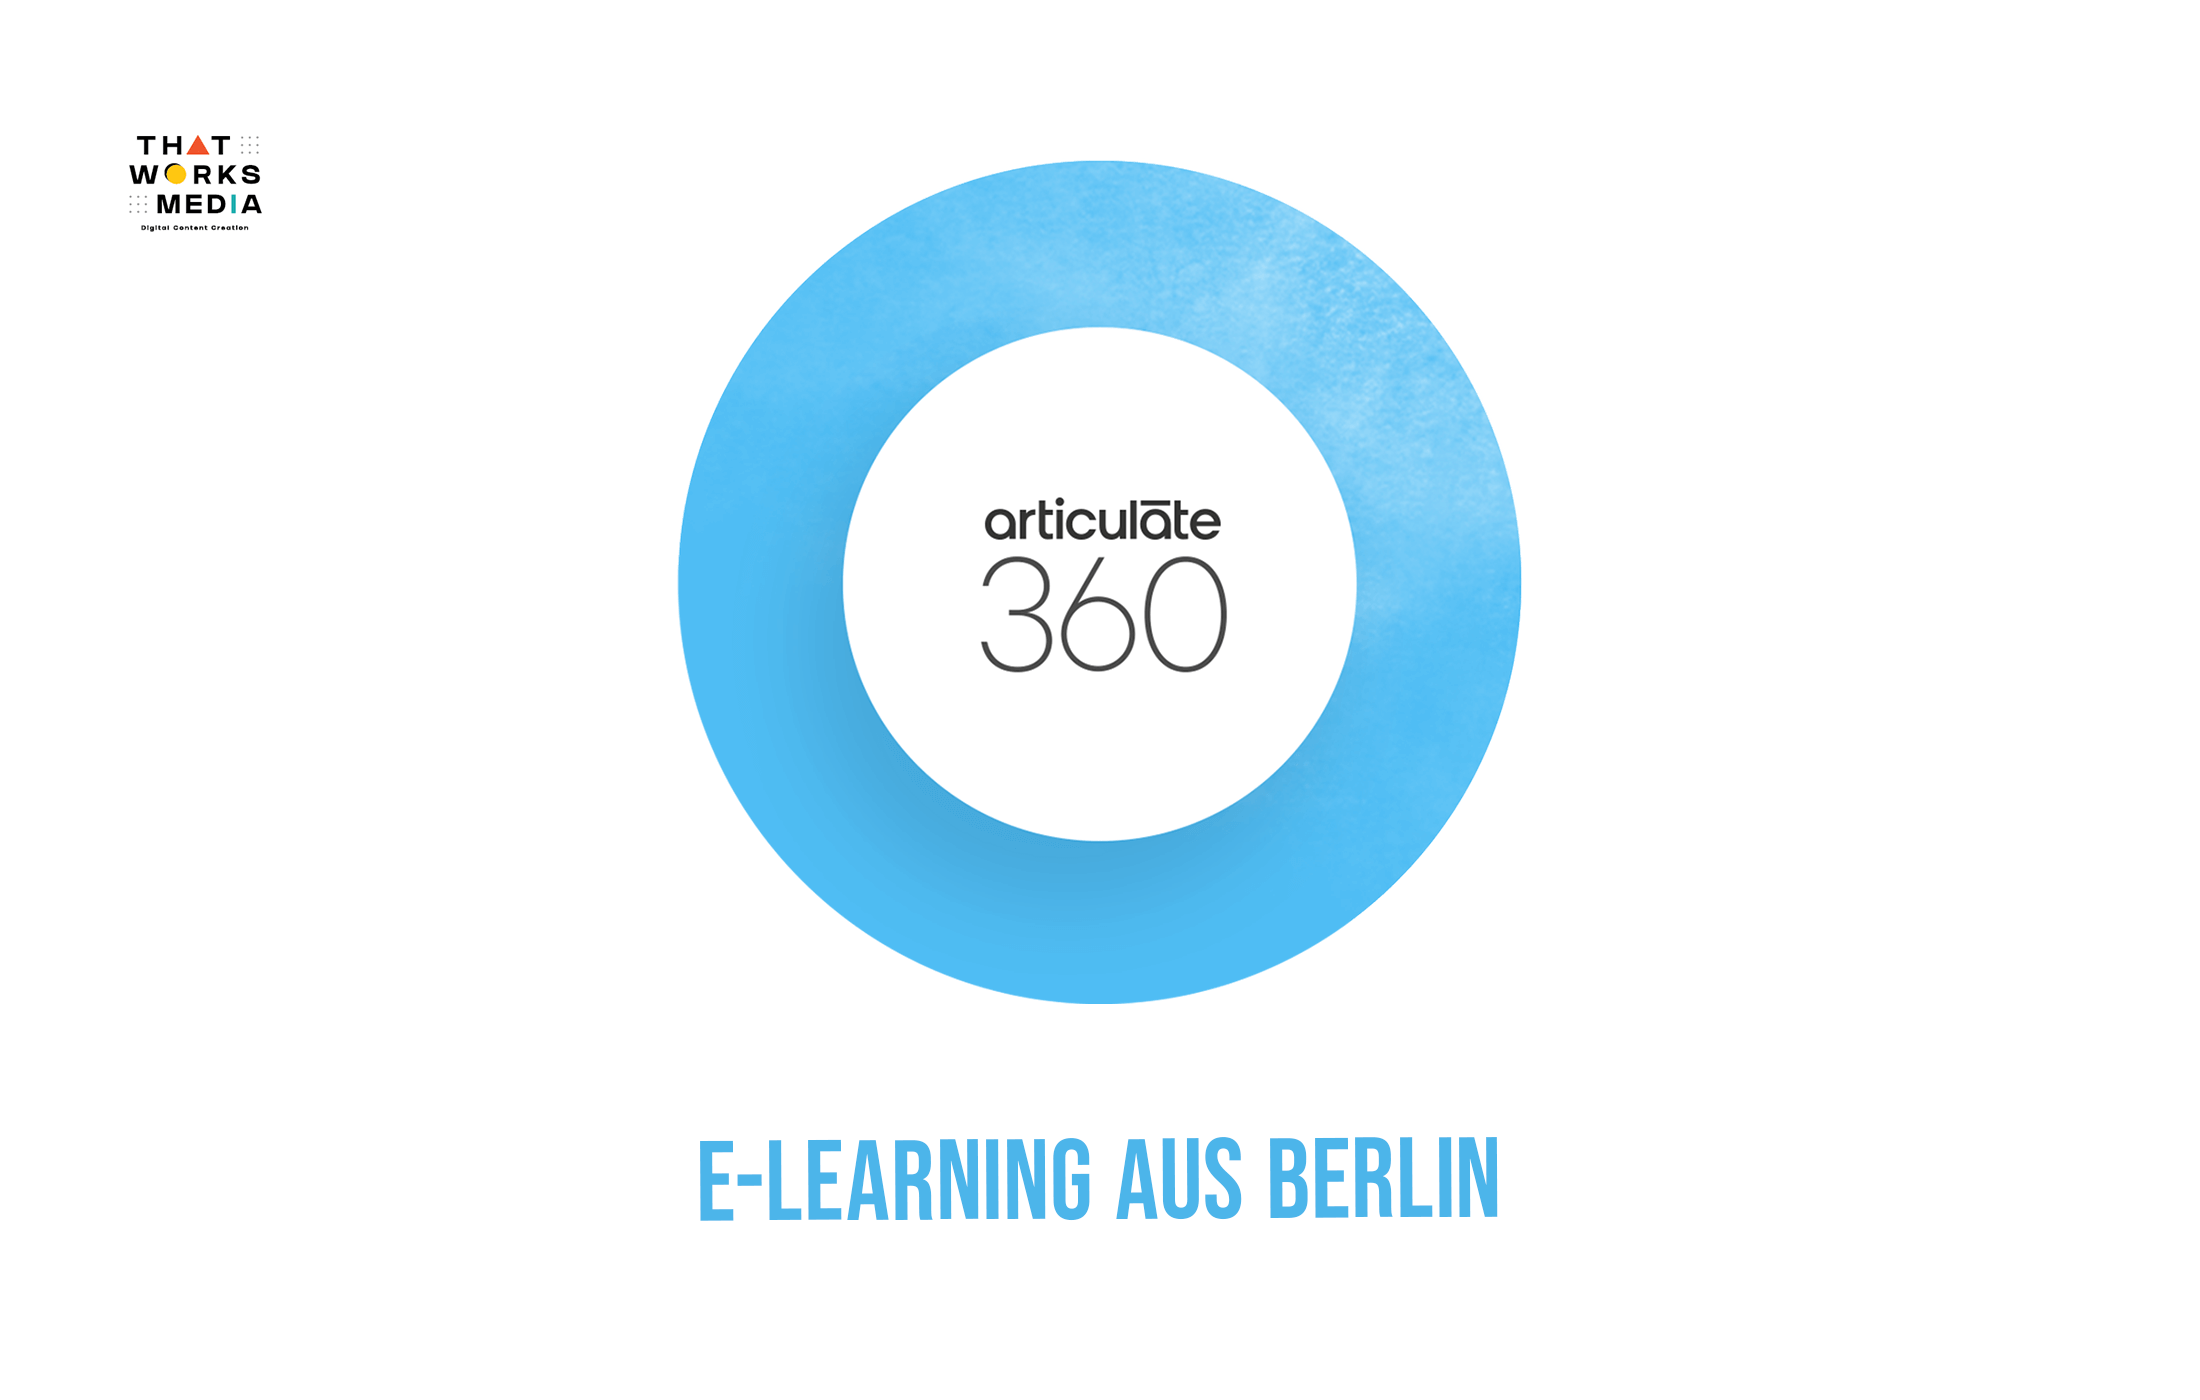 e-learning aus berlin articulate rise 360-that works media